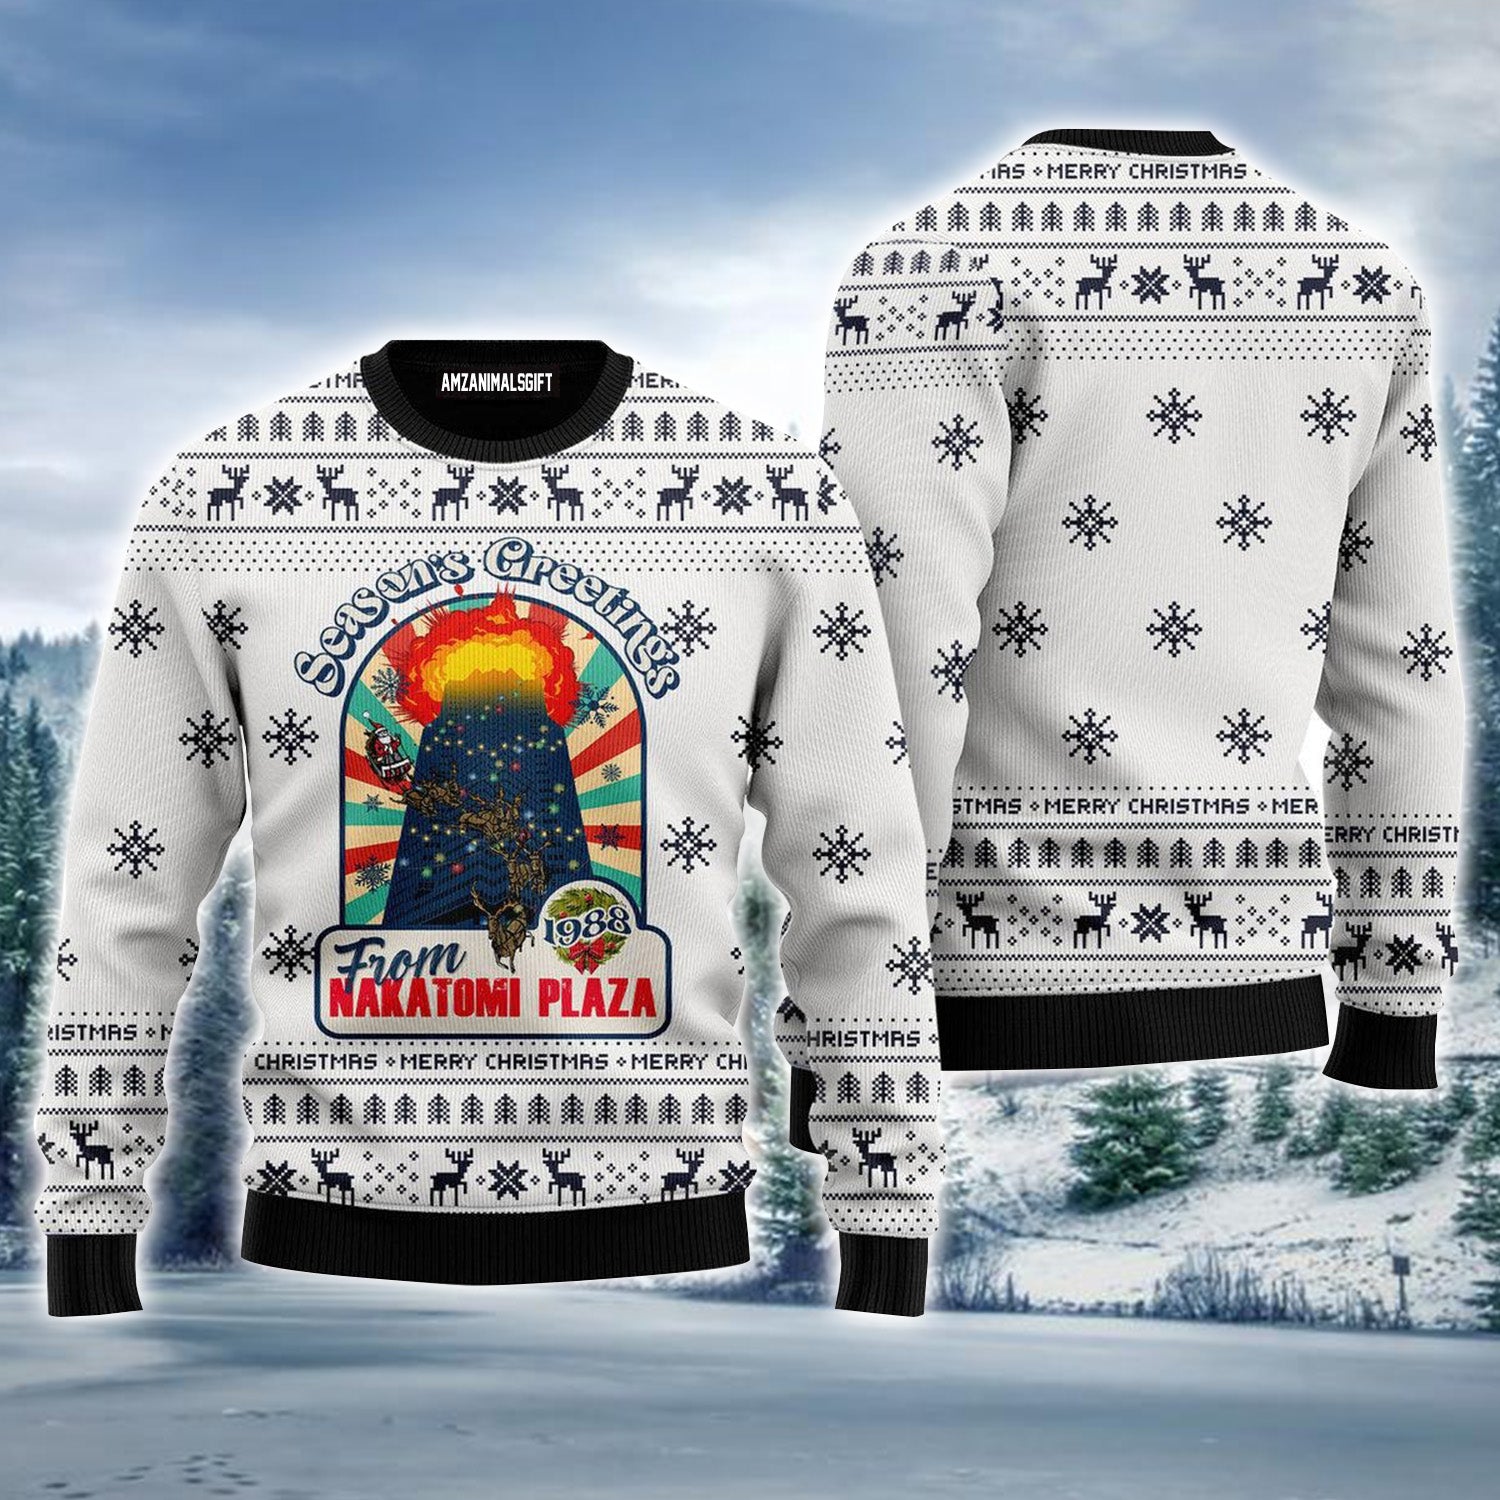 Season Greeting From Nakatomi Plaza, Christmas 1988 Ugly Sweater For Men & Women, Perfect Outfit For Christmas New Year Autumn Winter